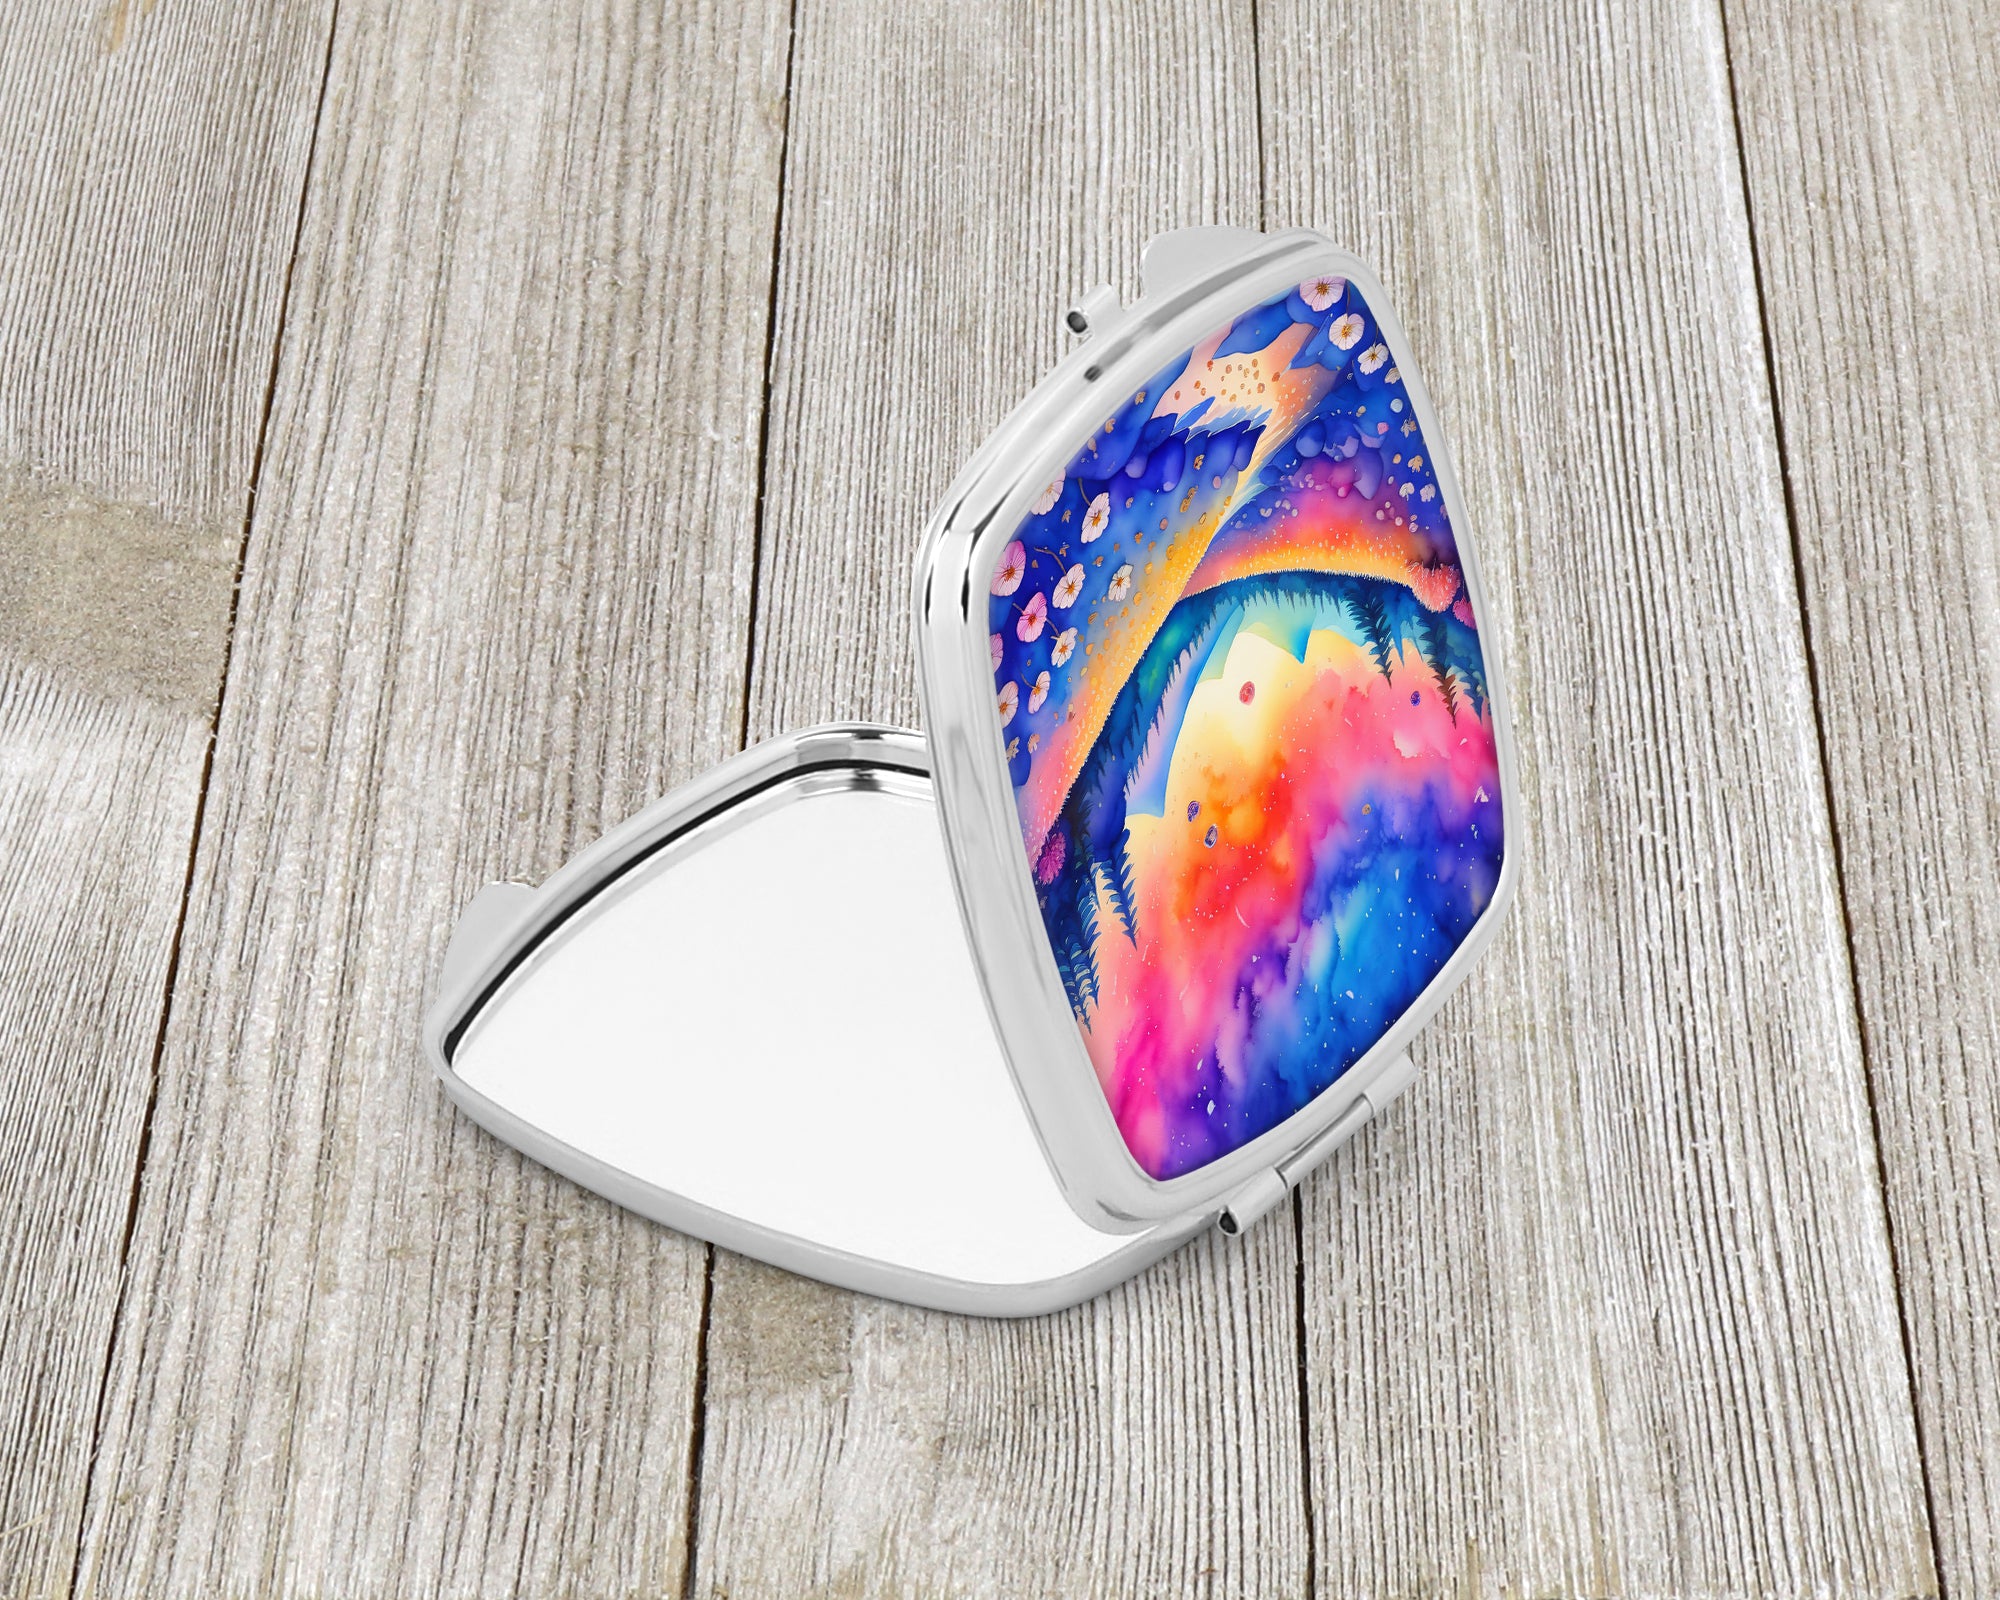 Buy this Colorful Periwinkles Compact Mirror